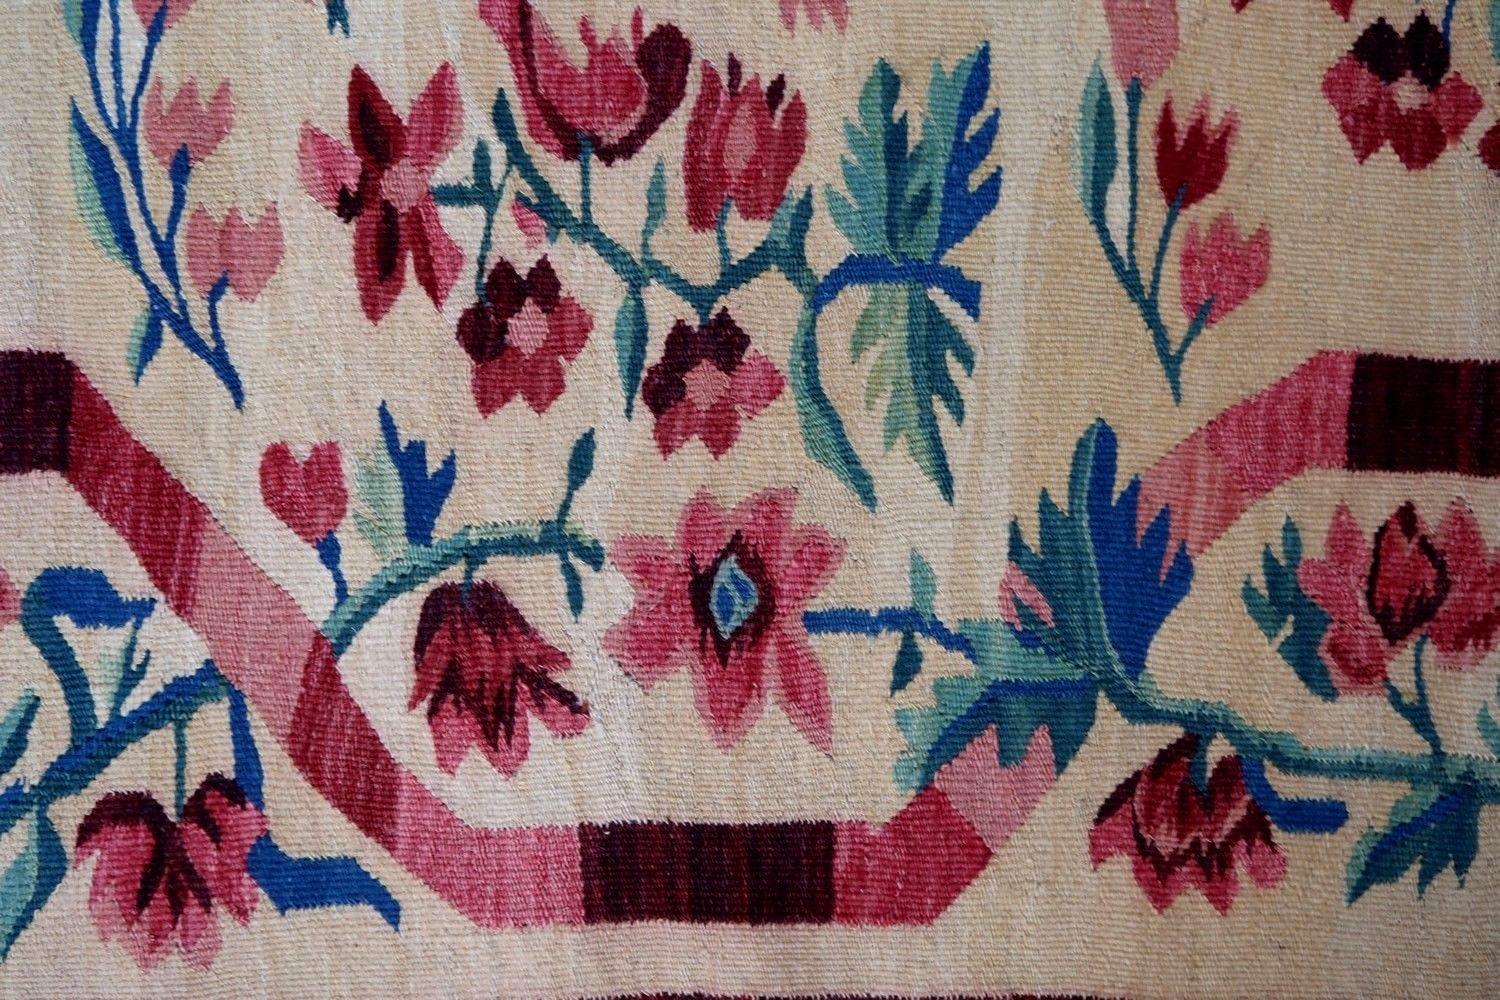 Handmade vintage Bessarabian kilim from Romania in decorative design. Vegetable dyes, the rug is in original good condition, made in the middle of 20th century

- Condition: Original good, 

- circa 1950s,

- Size: 5.5' x 8.2' (170cm x